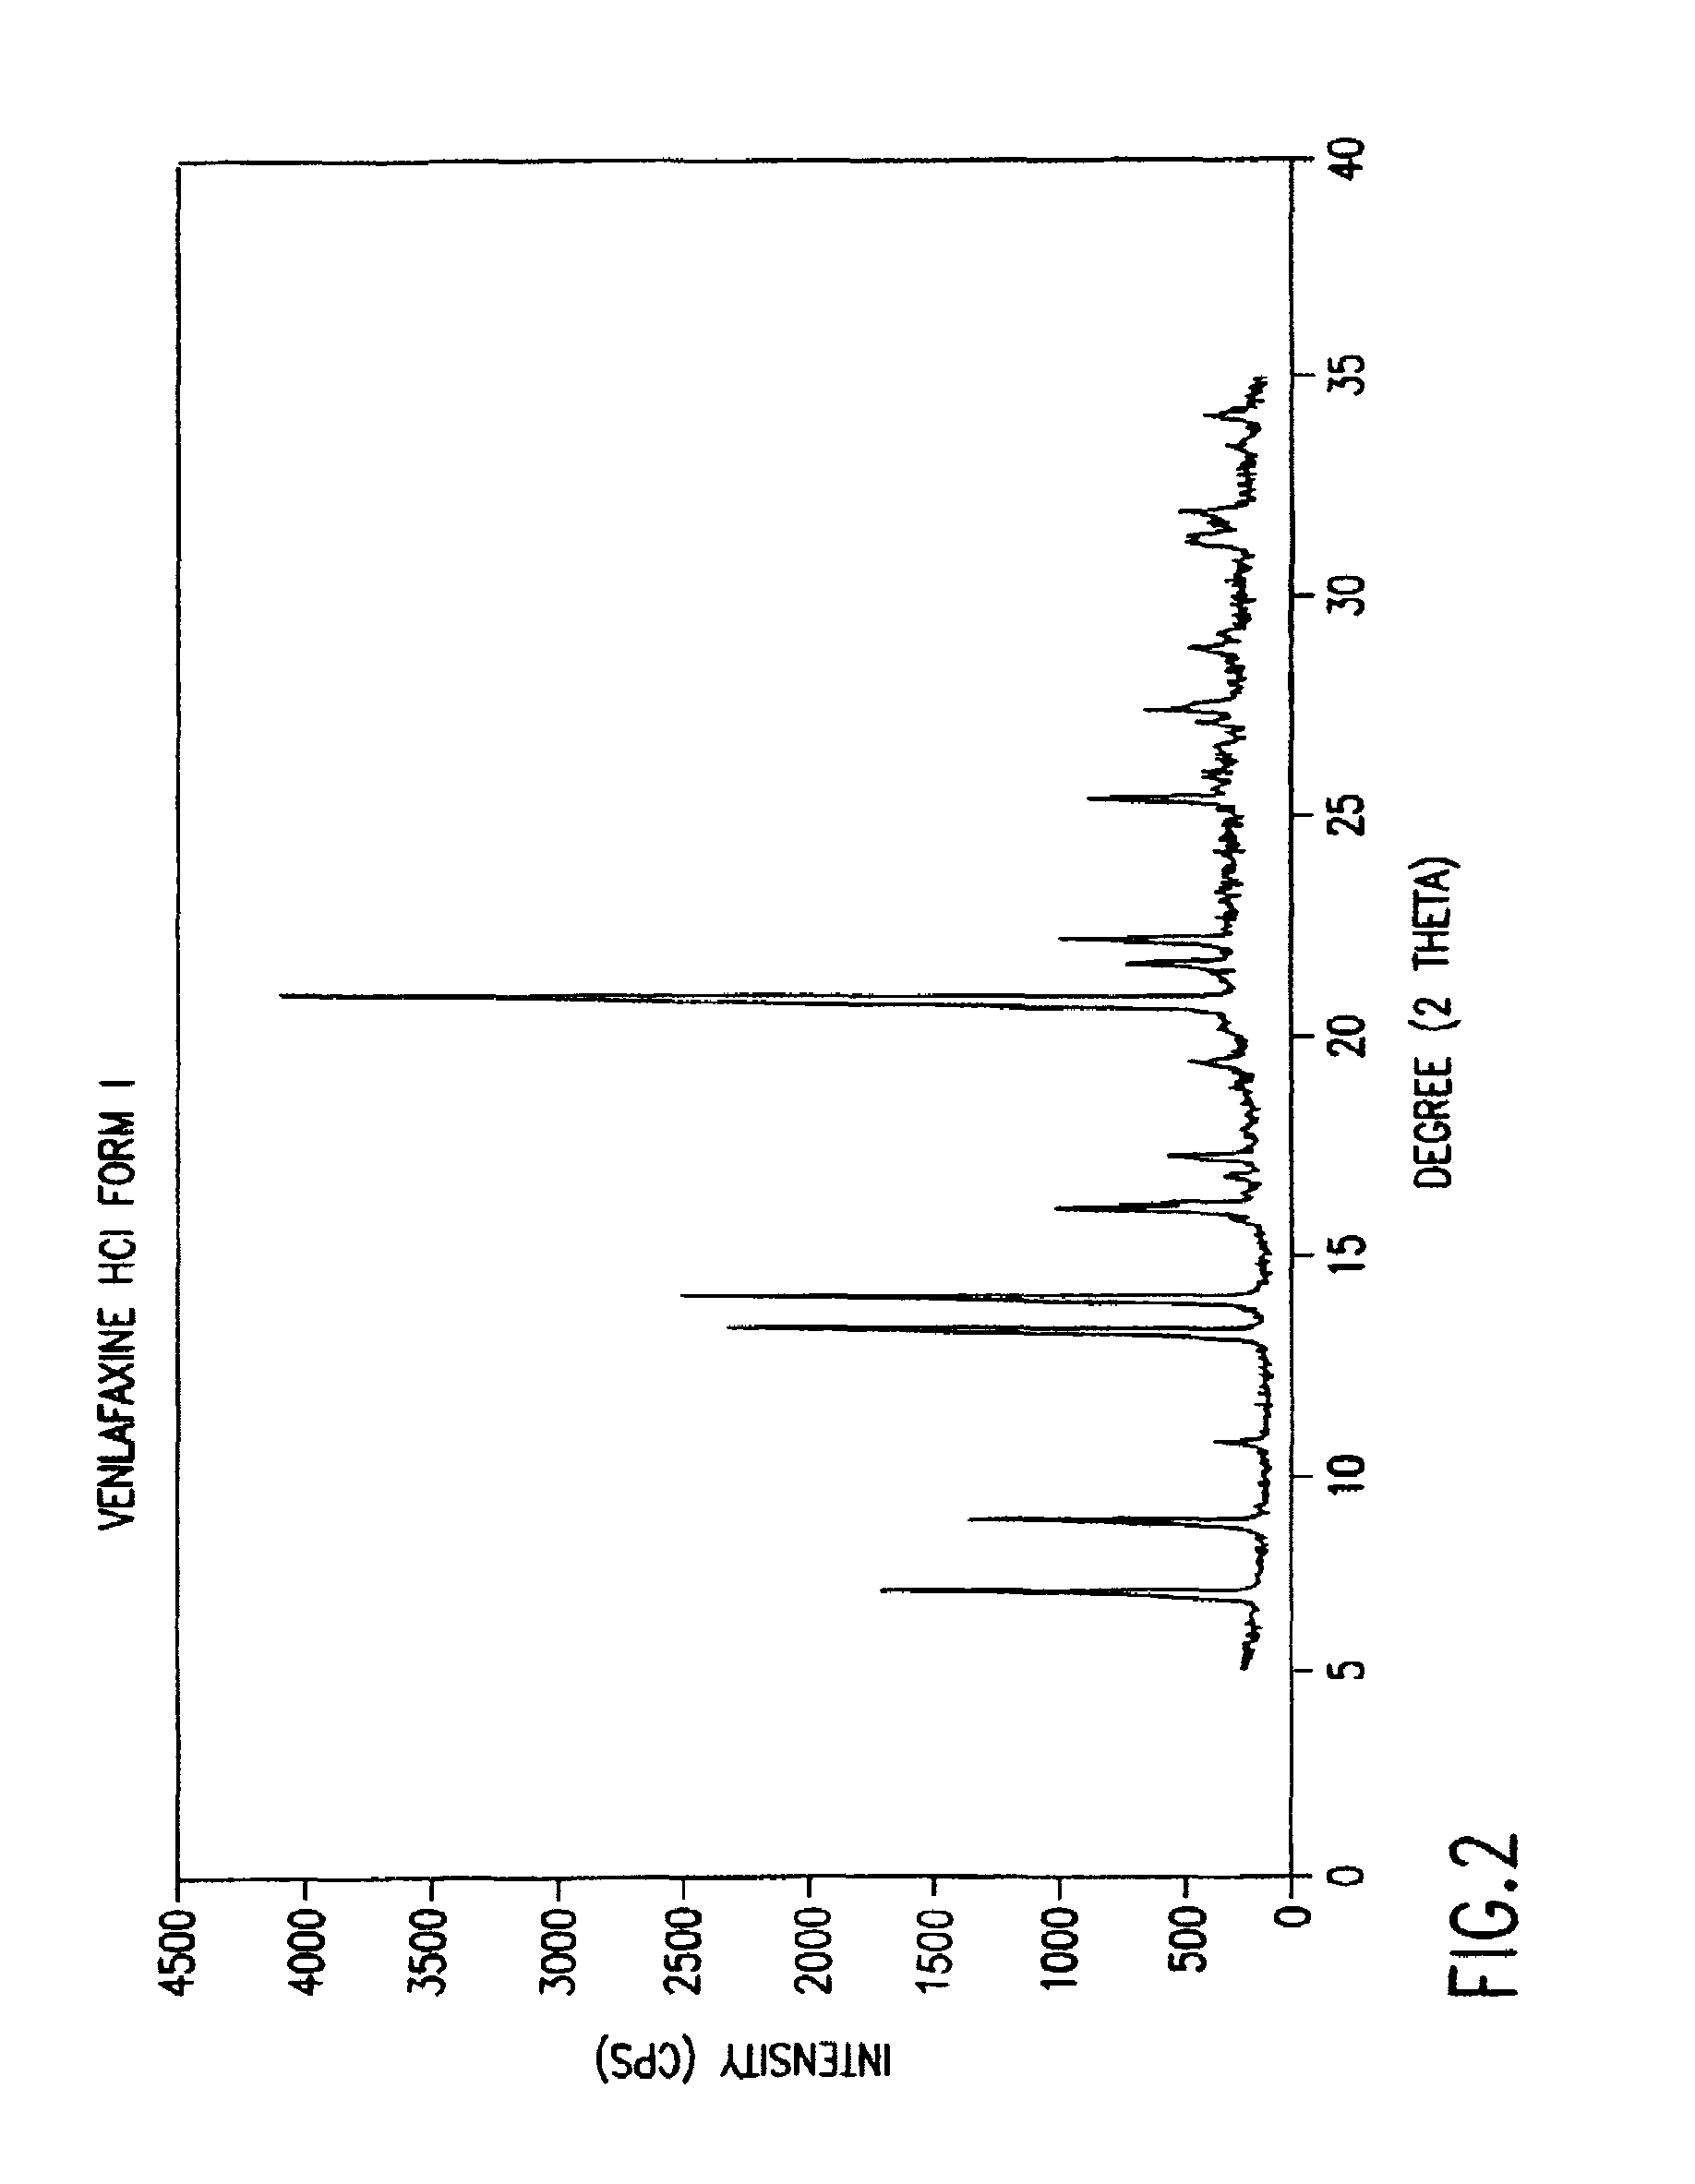 Crystalline polymorph of venlafaxine hydrochloride and methods for the preparation thereof